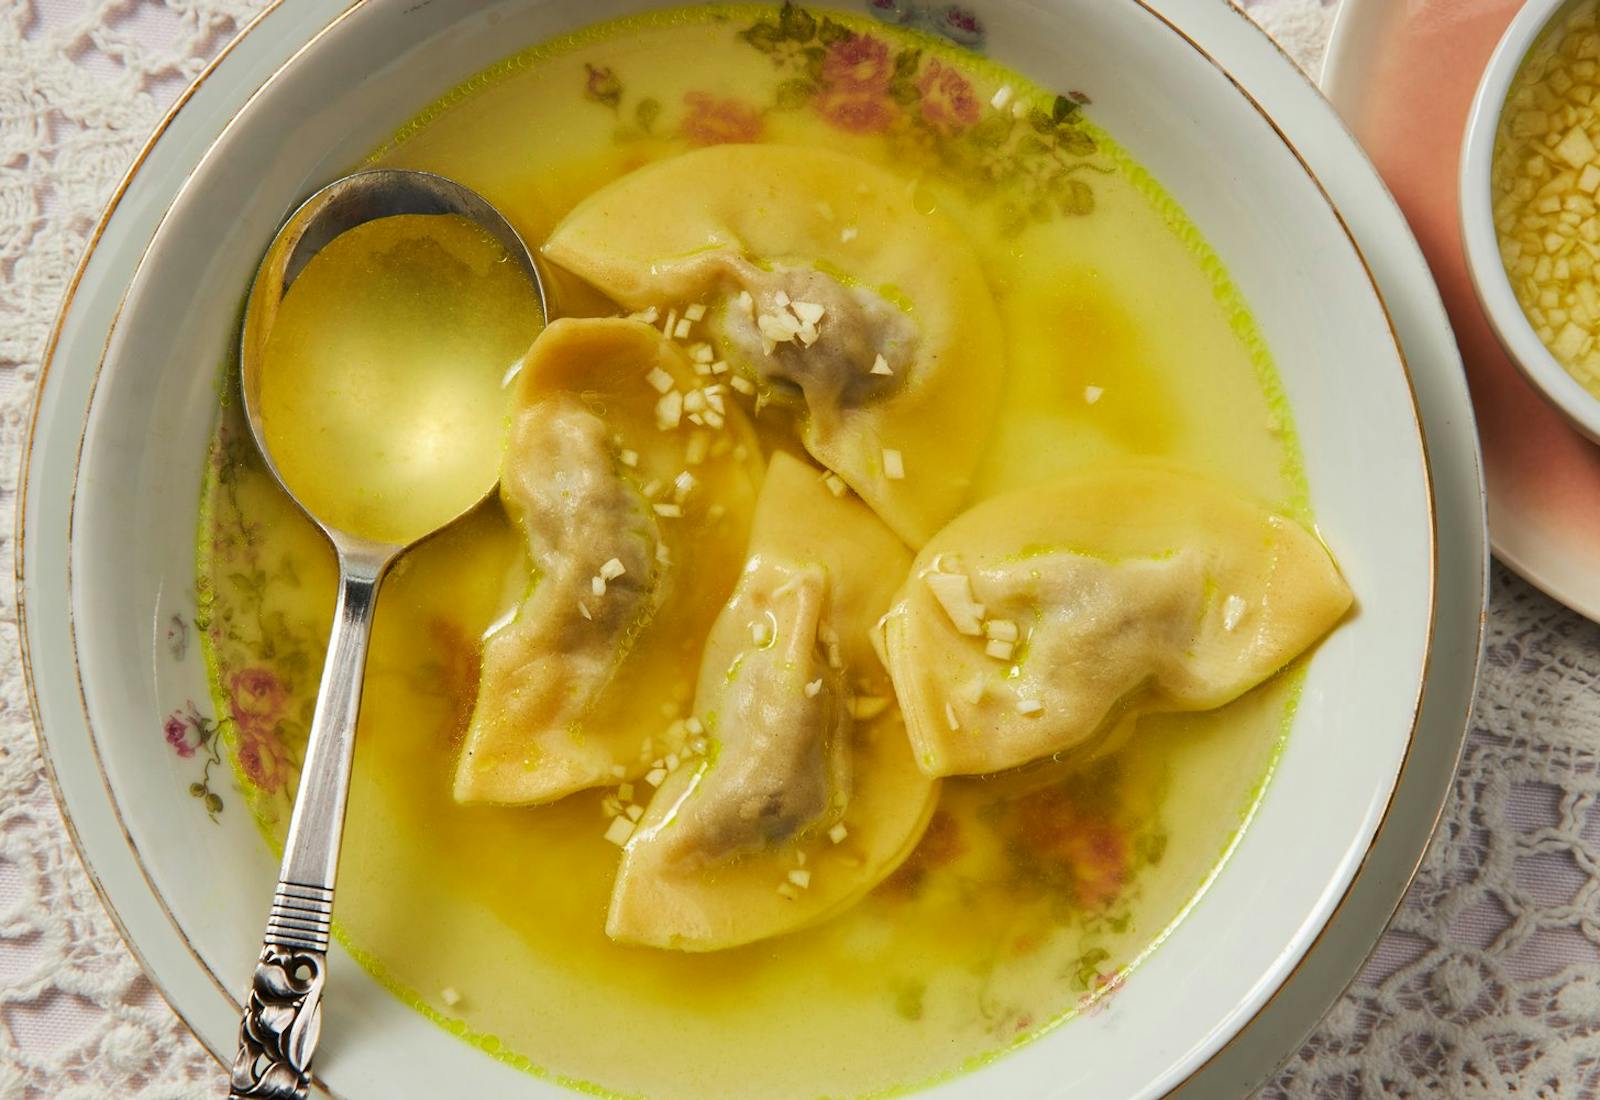 Dumpling soup with dish of minced garlic and broth.